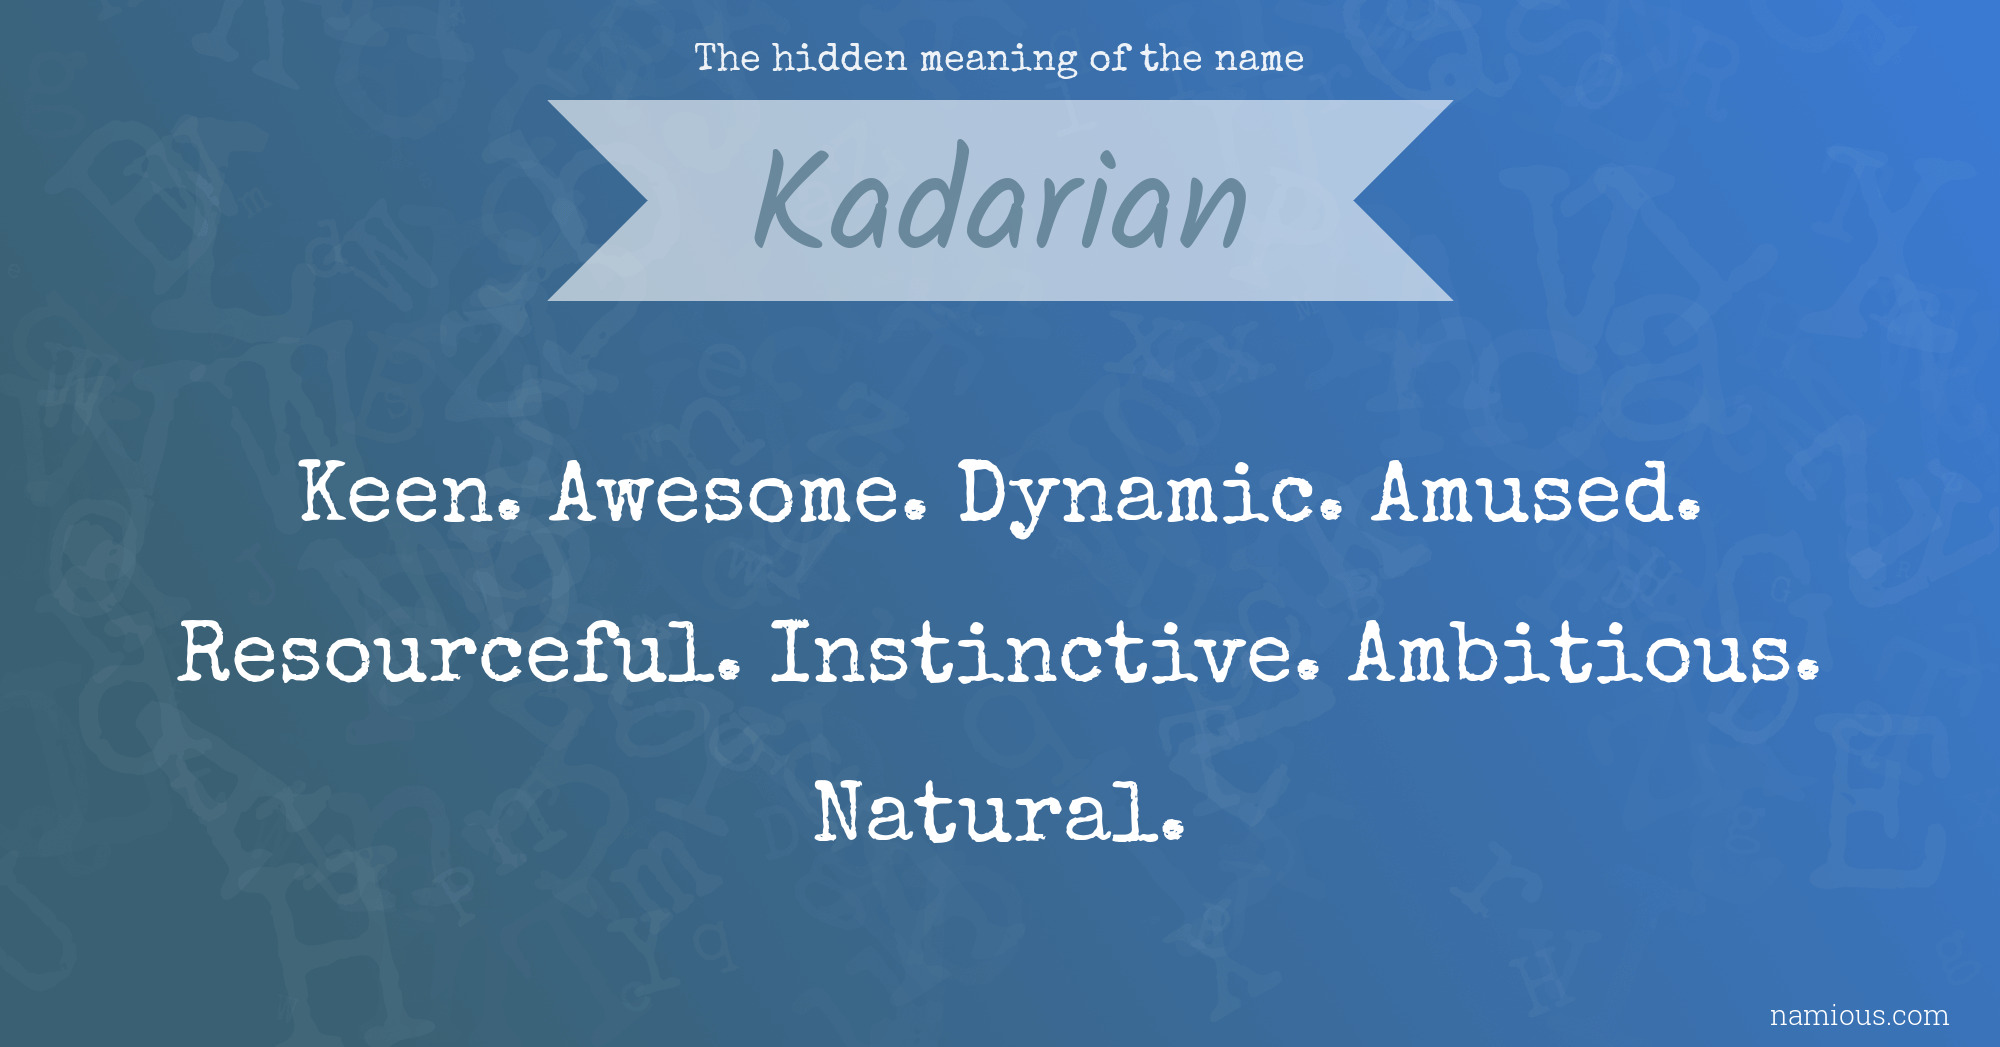 The hidden meaning of the name Kadarian